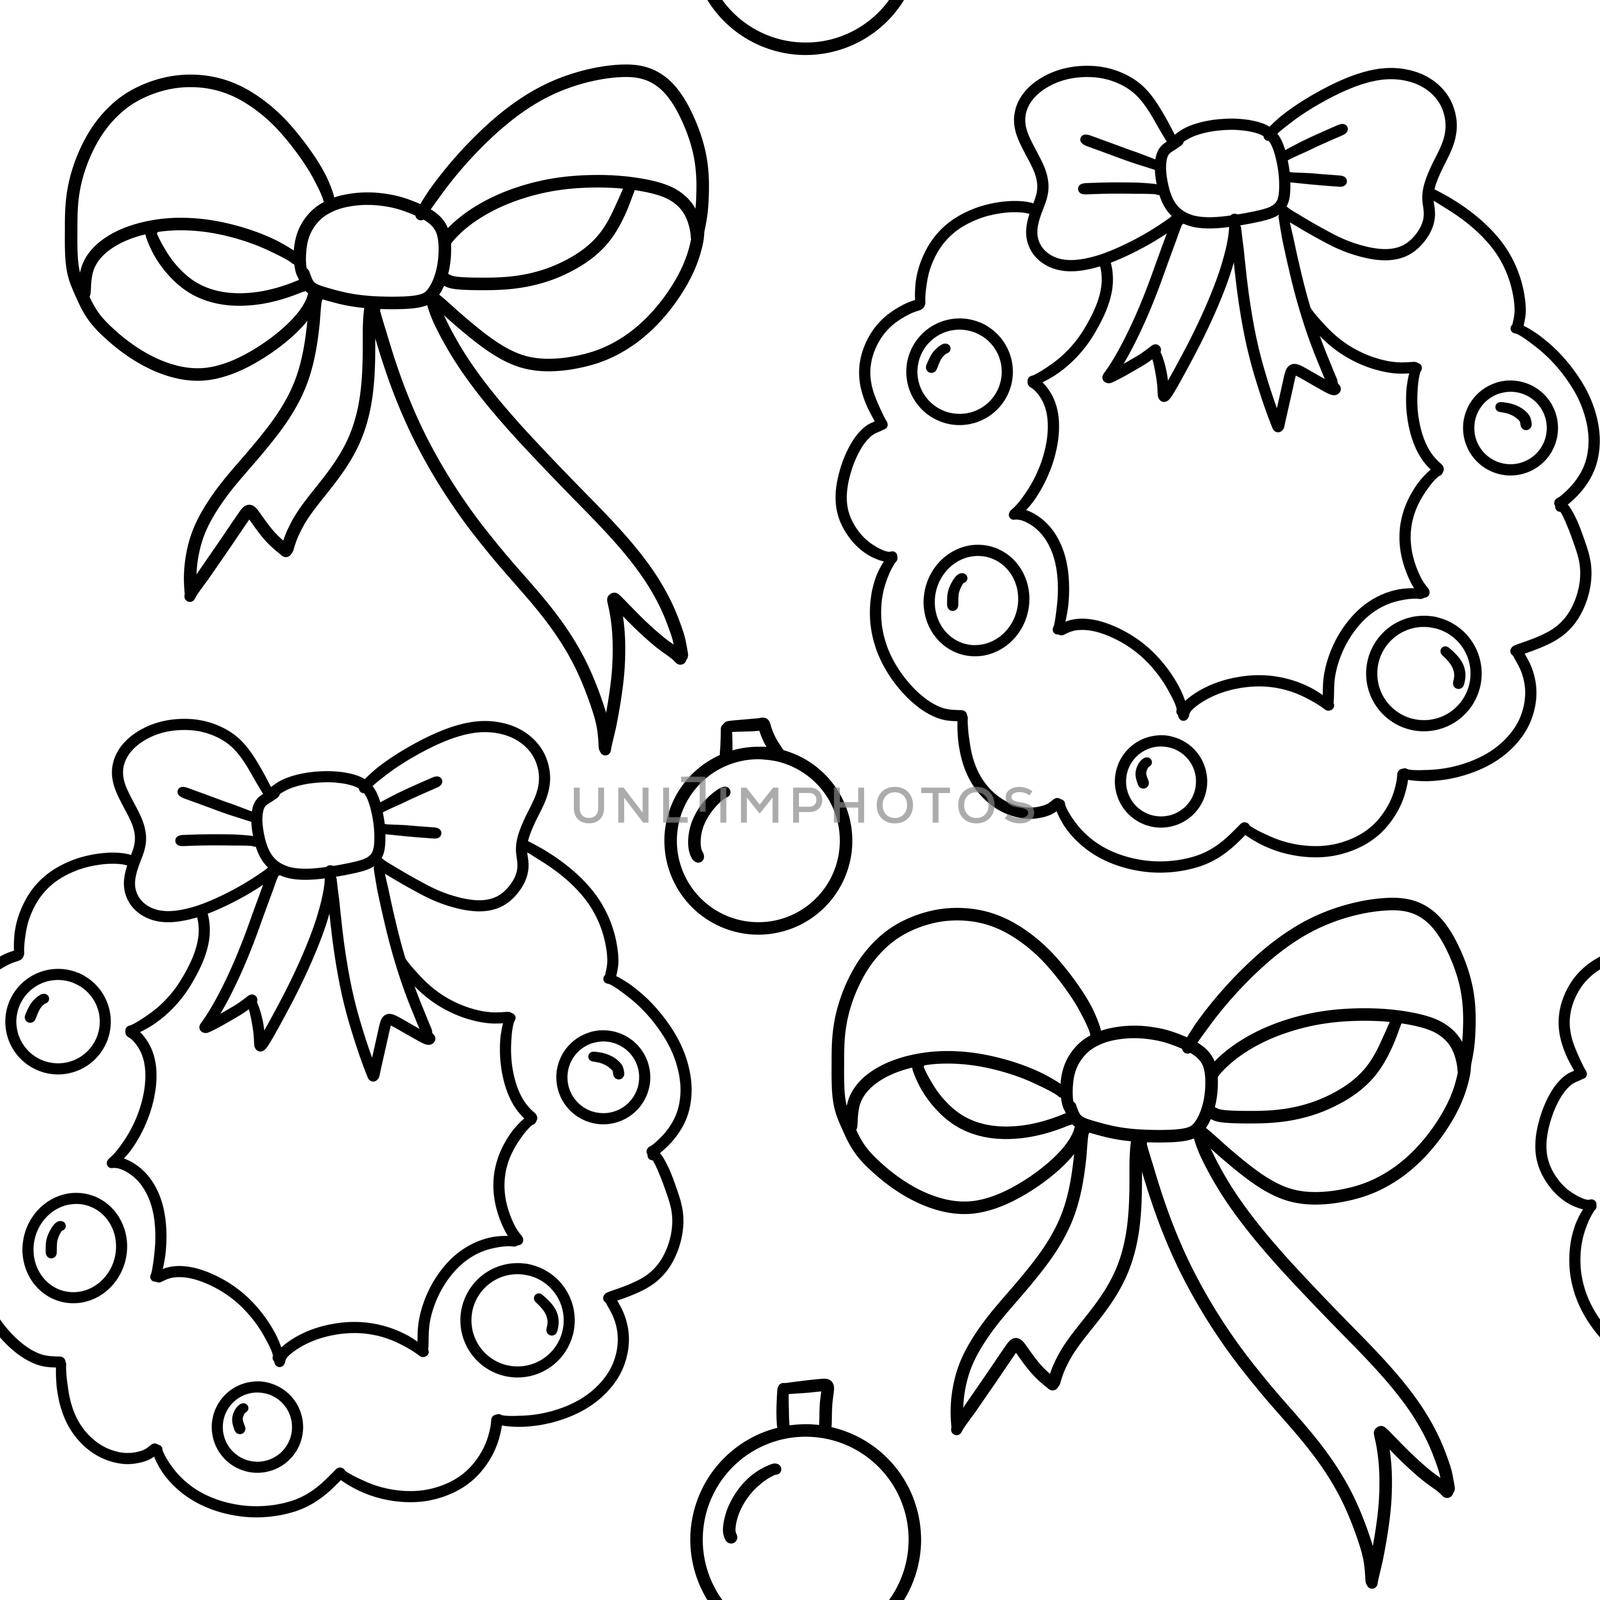 Hand drawn black and white seamless pattern with Christmas winter trees ornaments. Nordic Scandinavian new year december minimalist design, cute fabric print, cartoon doodle style